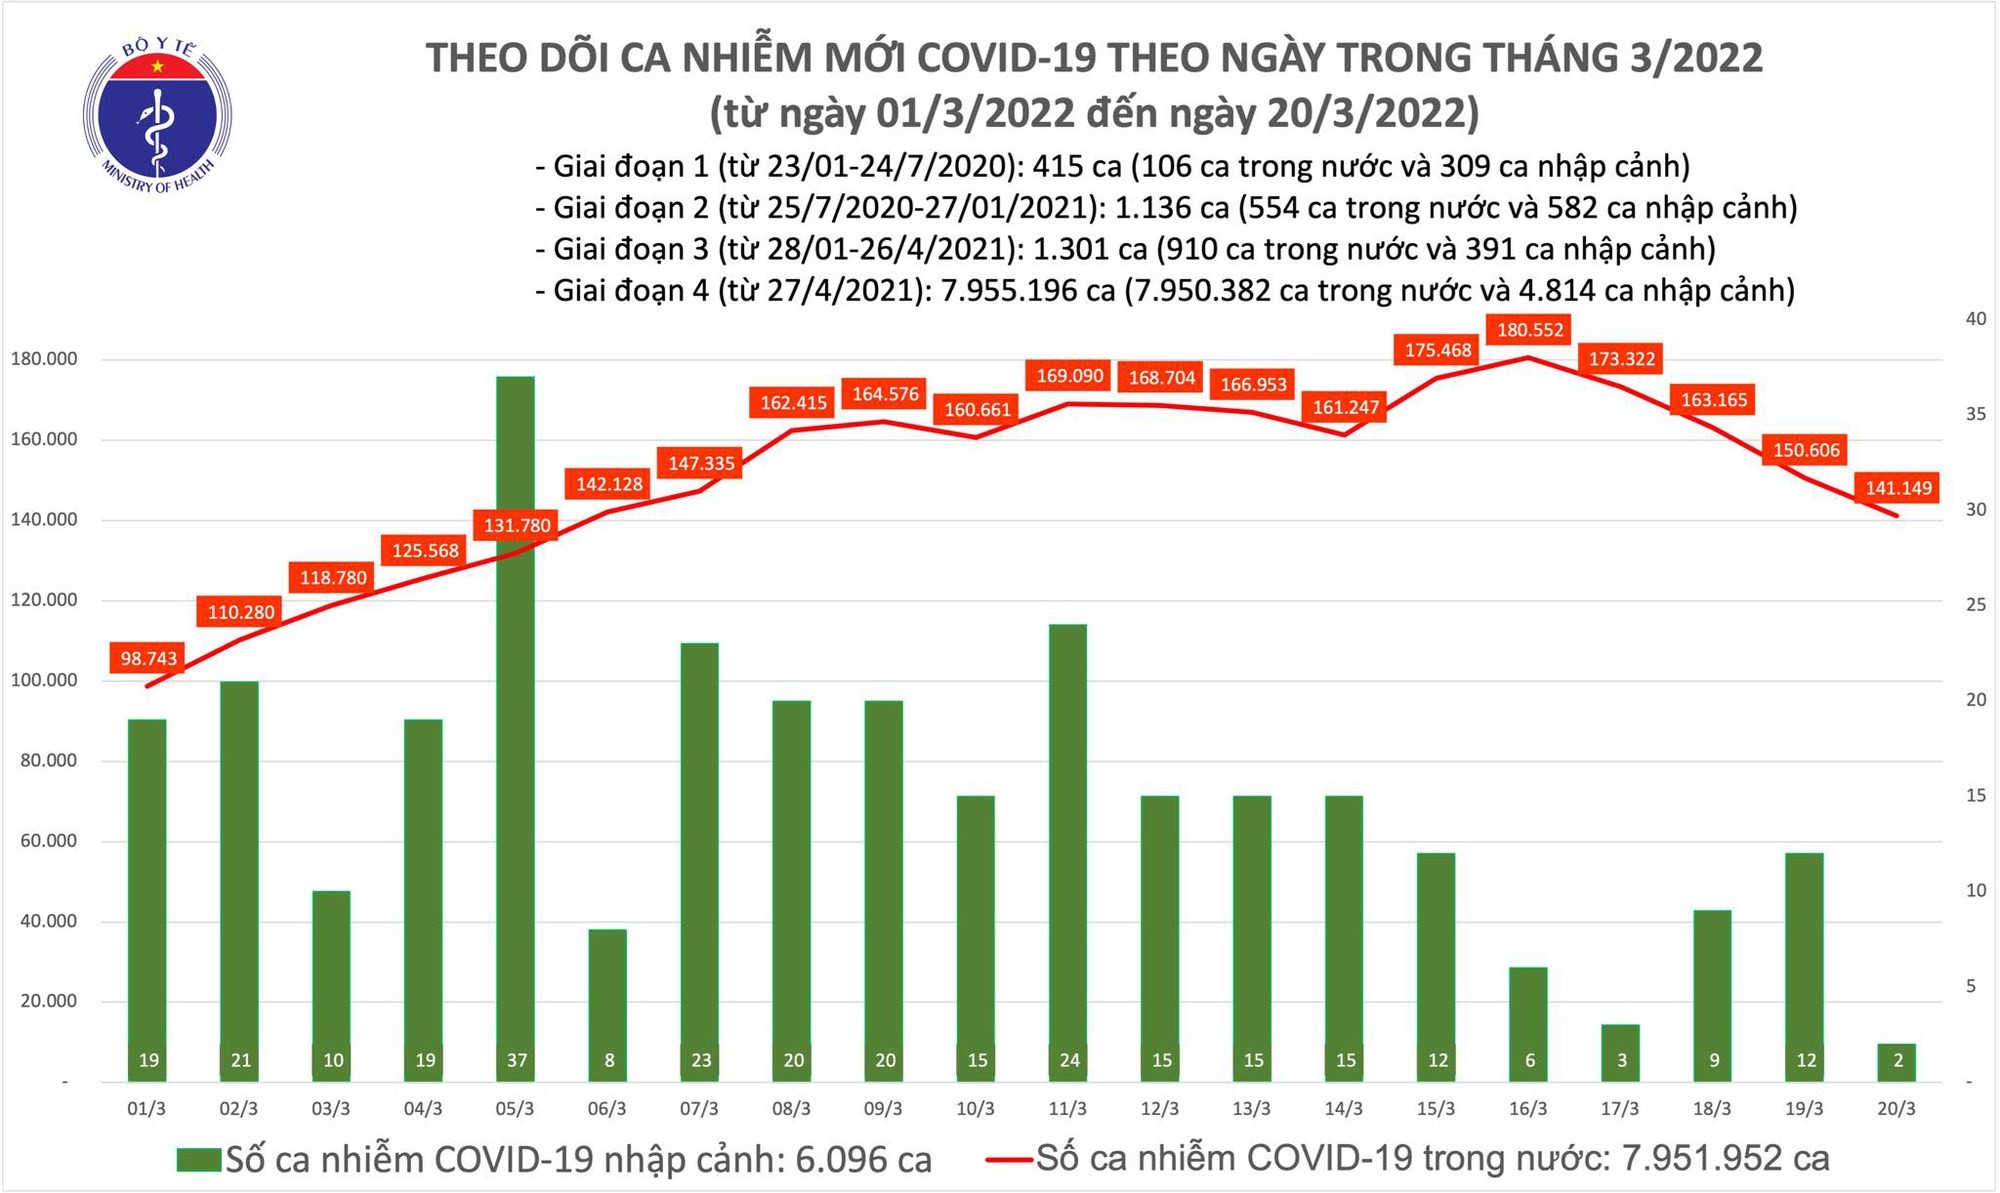 March 20: The whole country adds 141,151 new COVID-19 cases, the number of cases in Hanoi drops sharply - 1